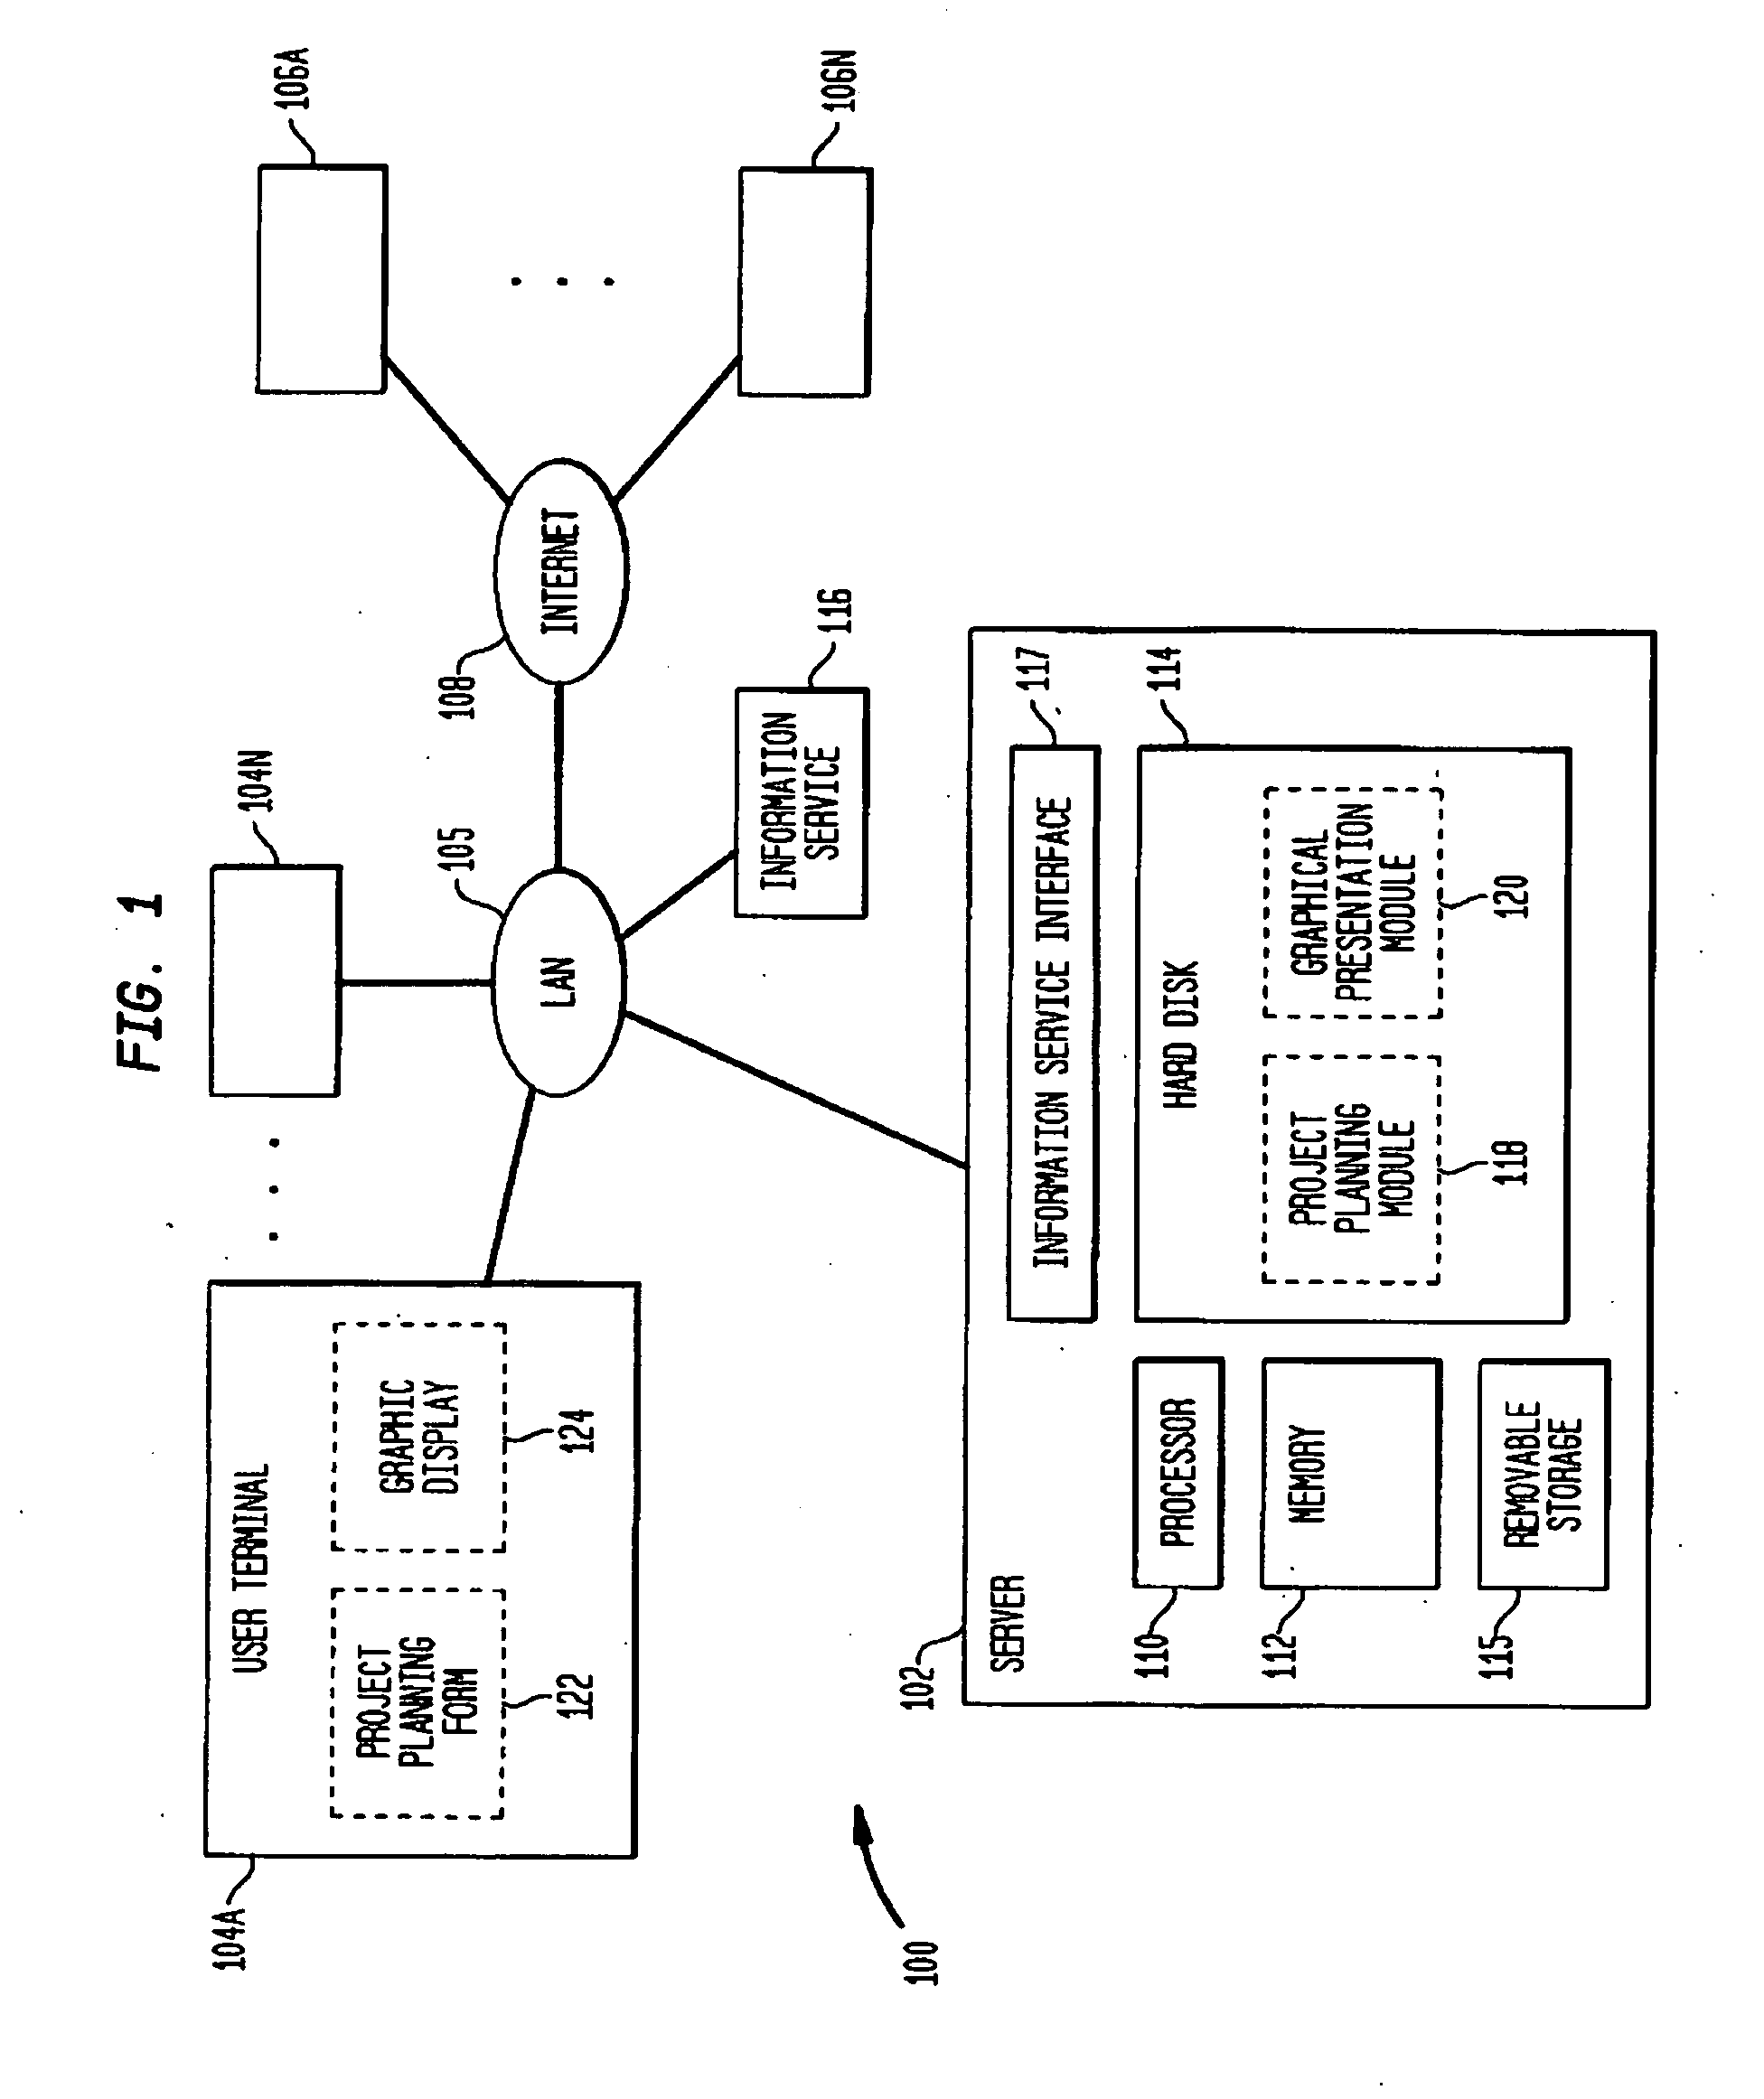 Methods and apparatus for associating and displaying project planning and management information in conjunction with geographic information